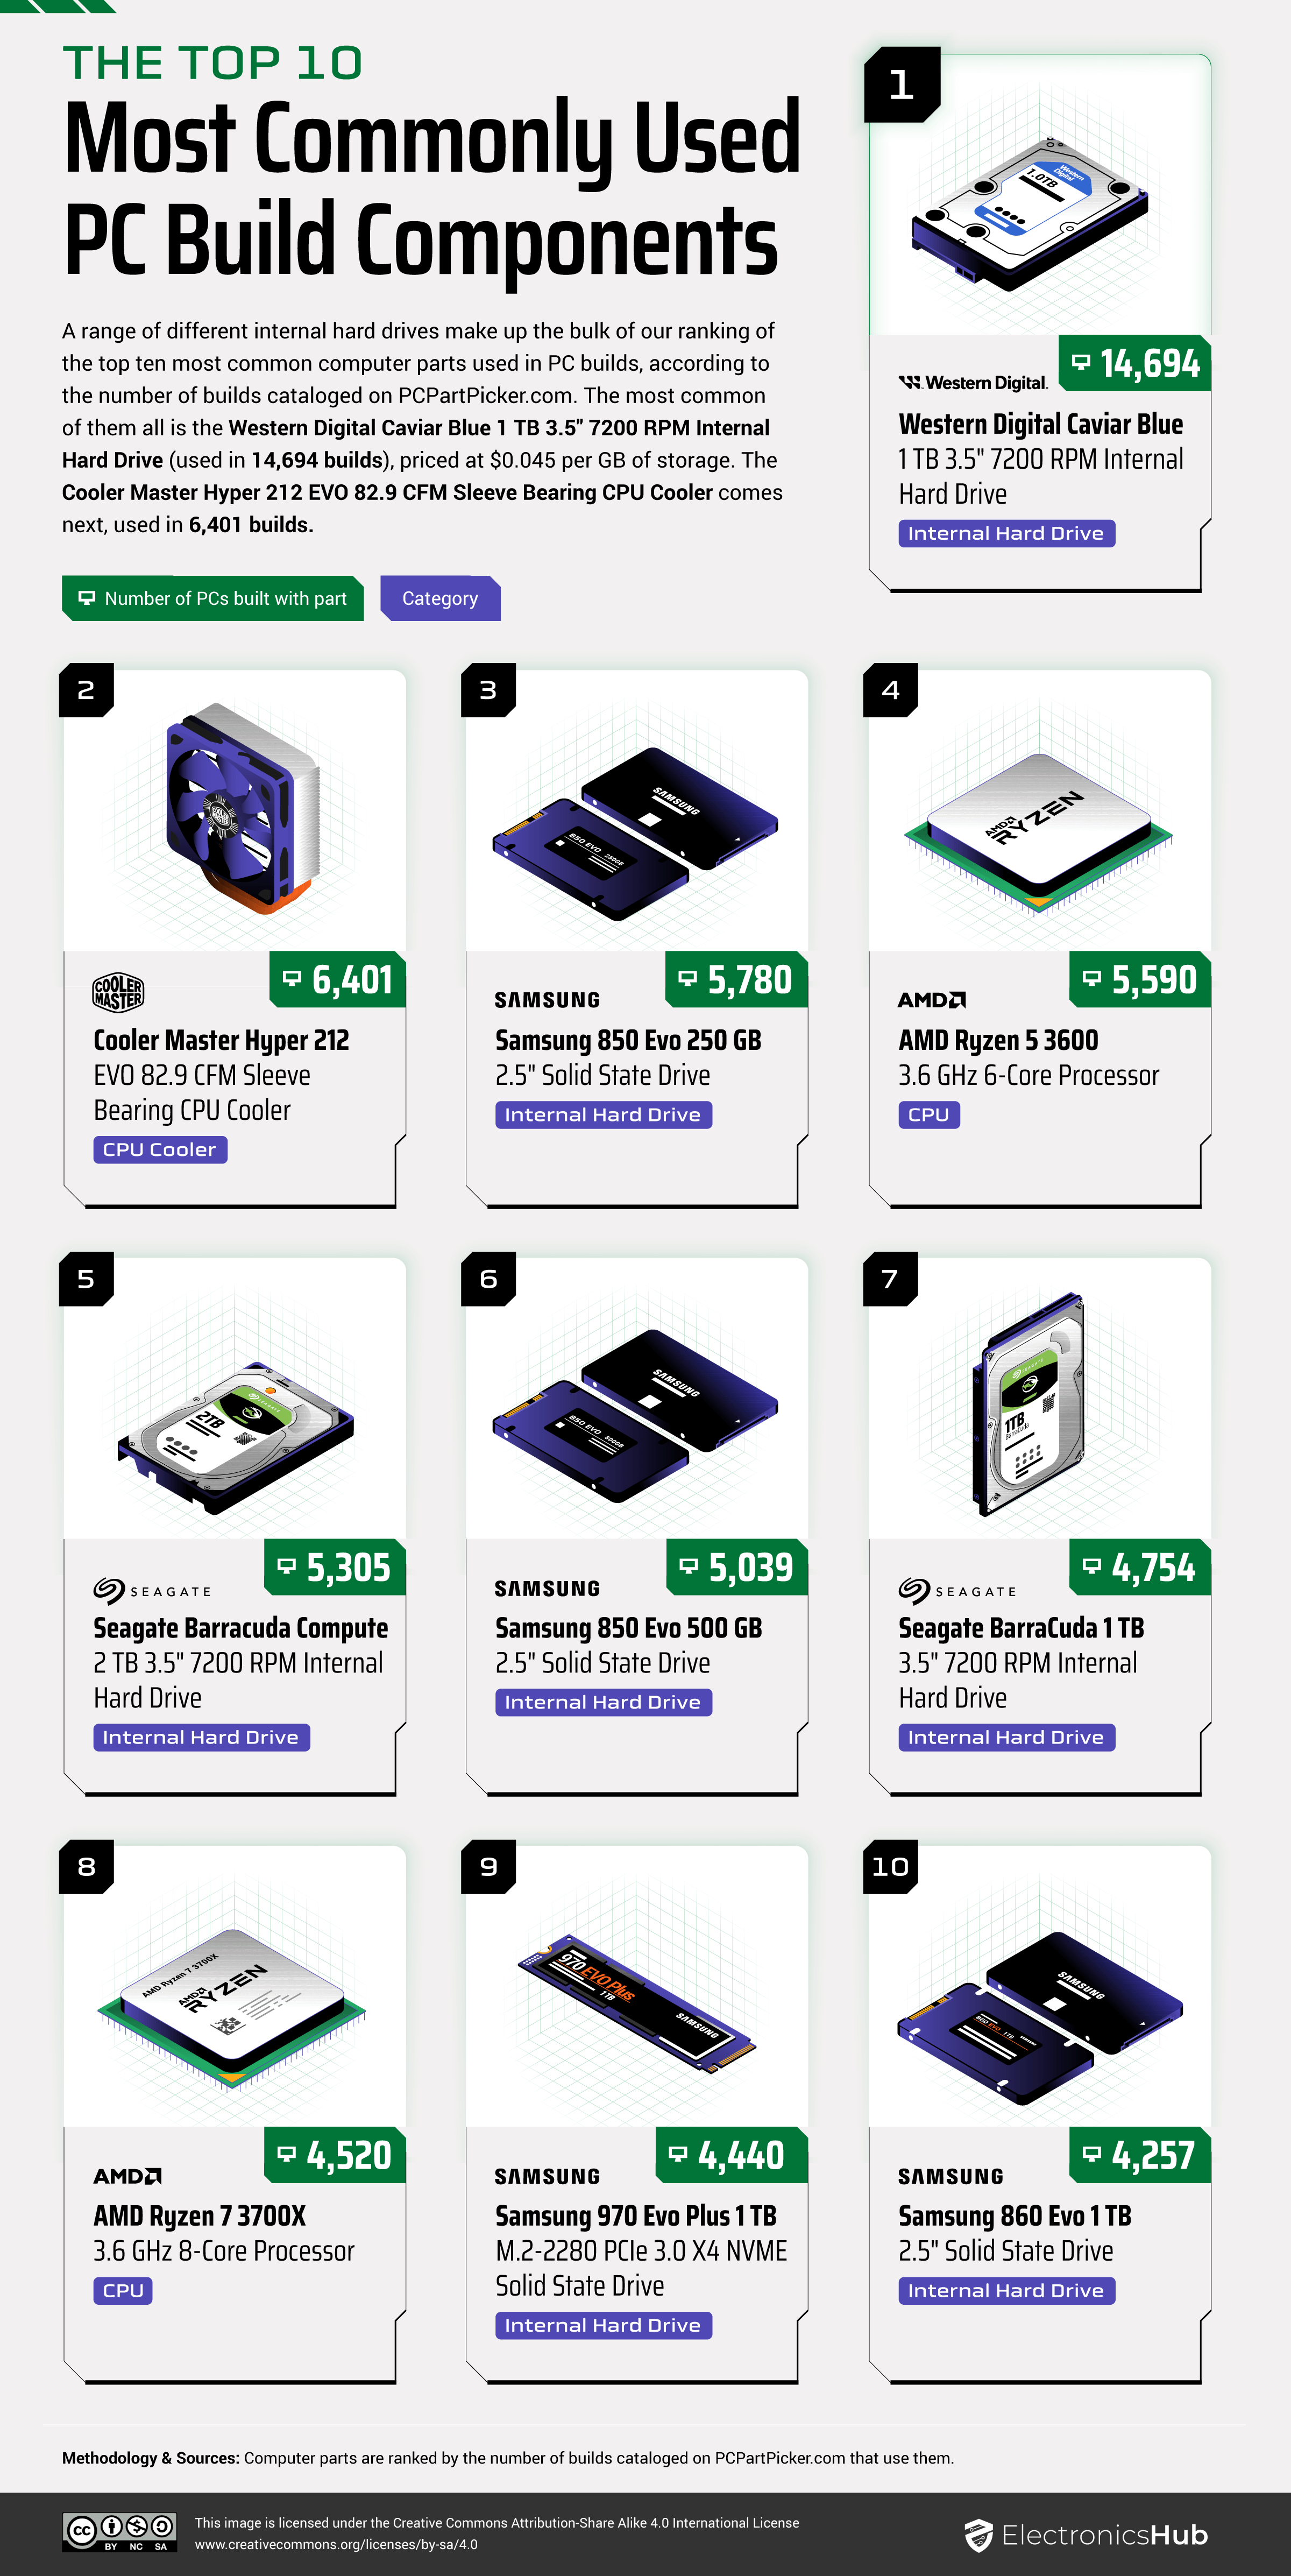 If you've ever found any PC components at a price that is way too